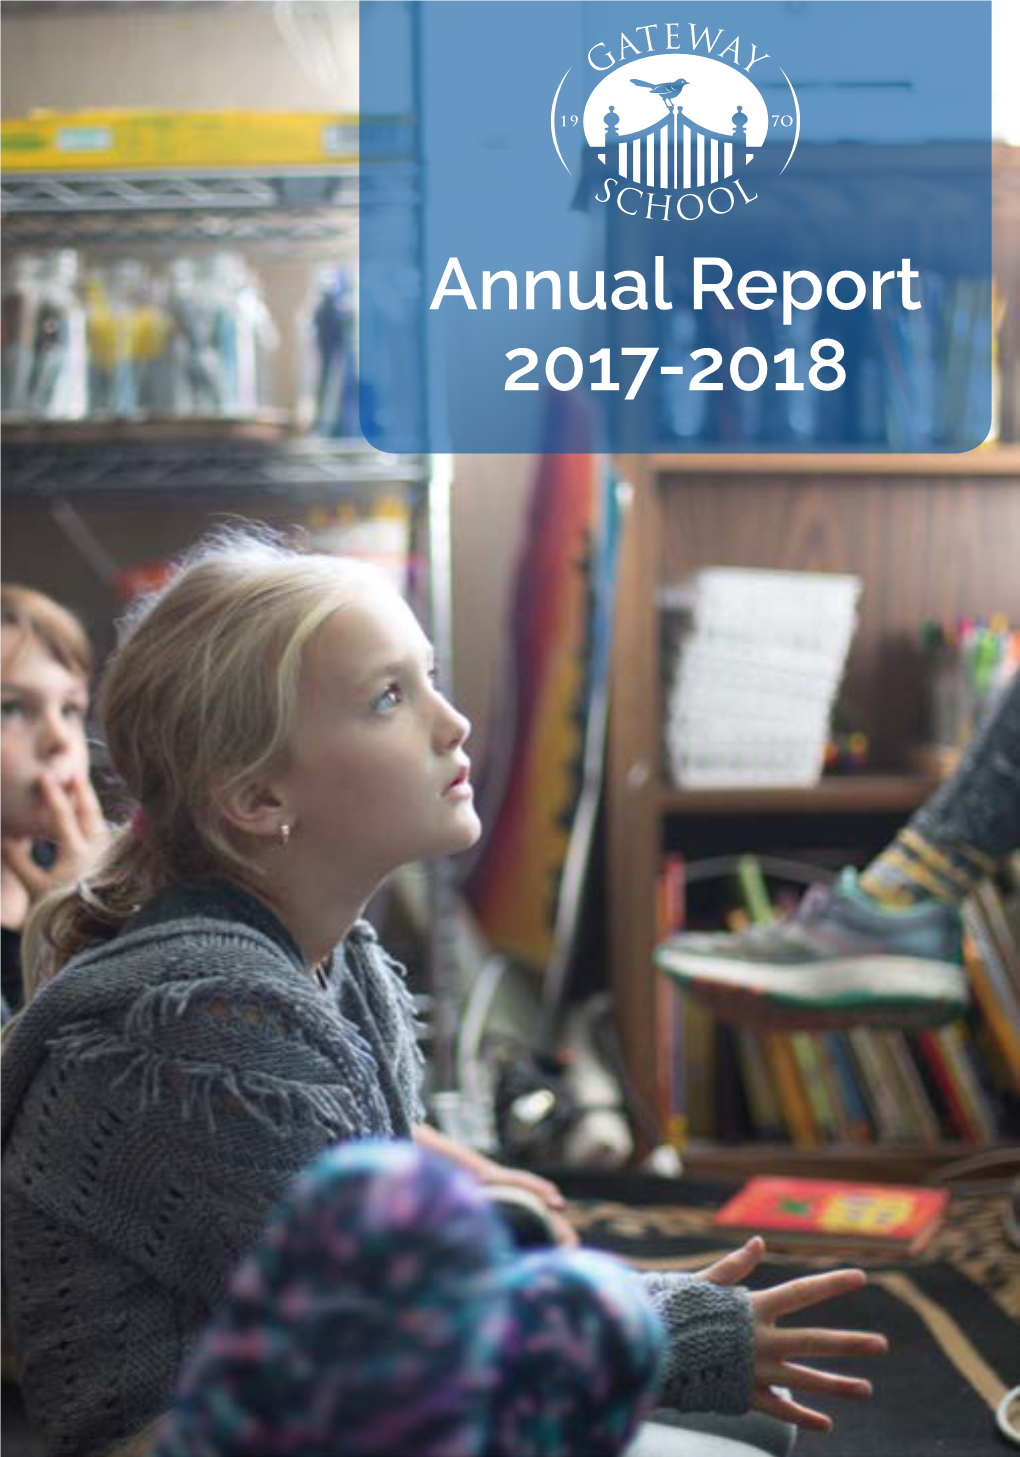 Annual Report 2017-2018 Mission to Inspire Children to Lead Lives of Purpose and Compassion Through Scholarship and Citizenship